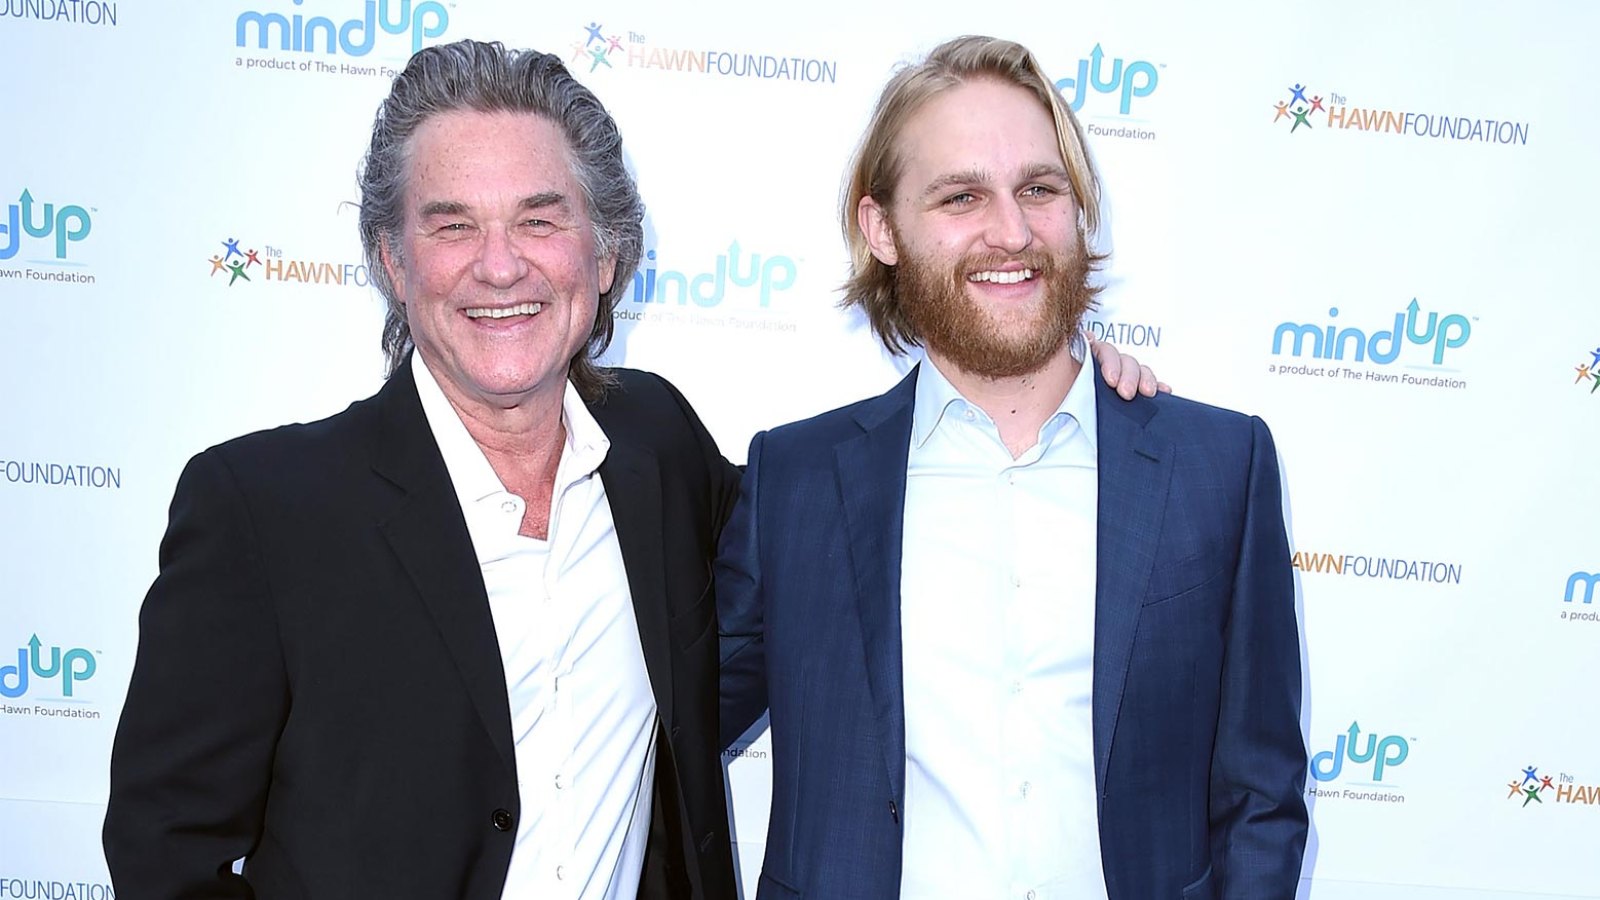 Kurt and Wyatt Russell's Quotes About Working Together on 'Monarch